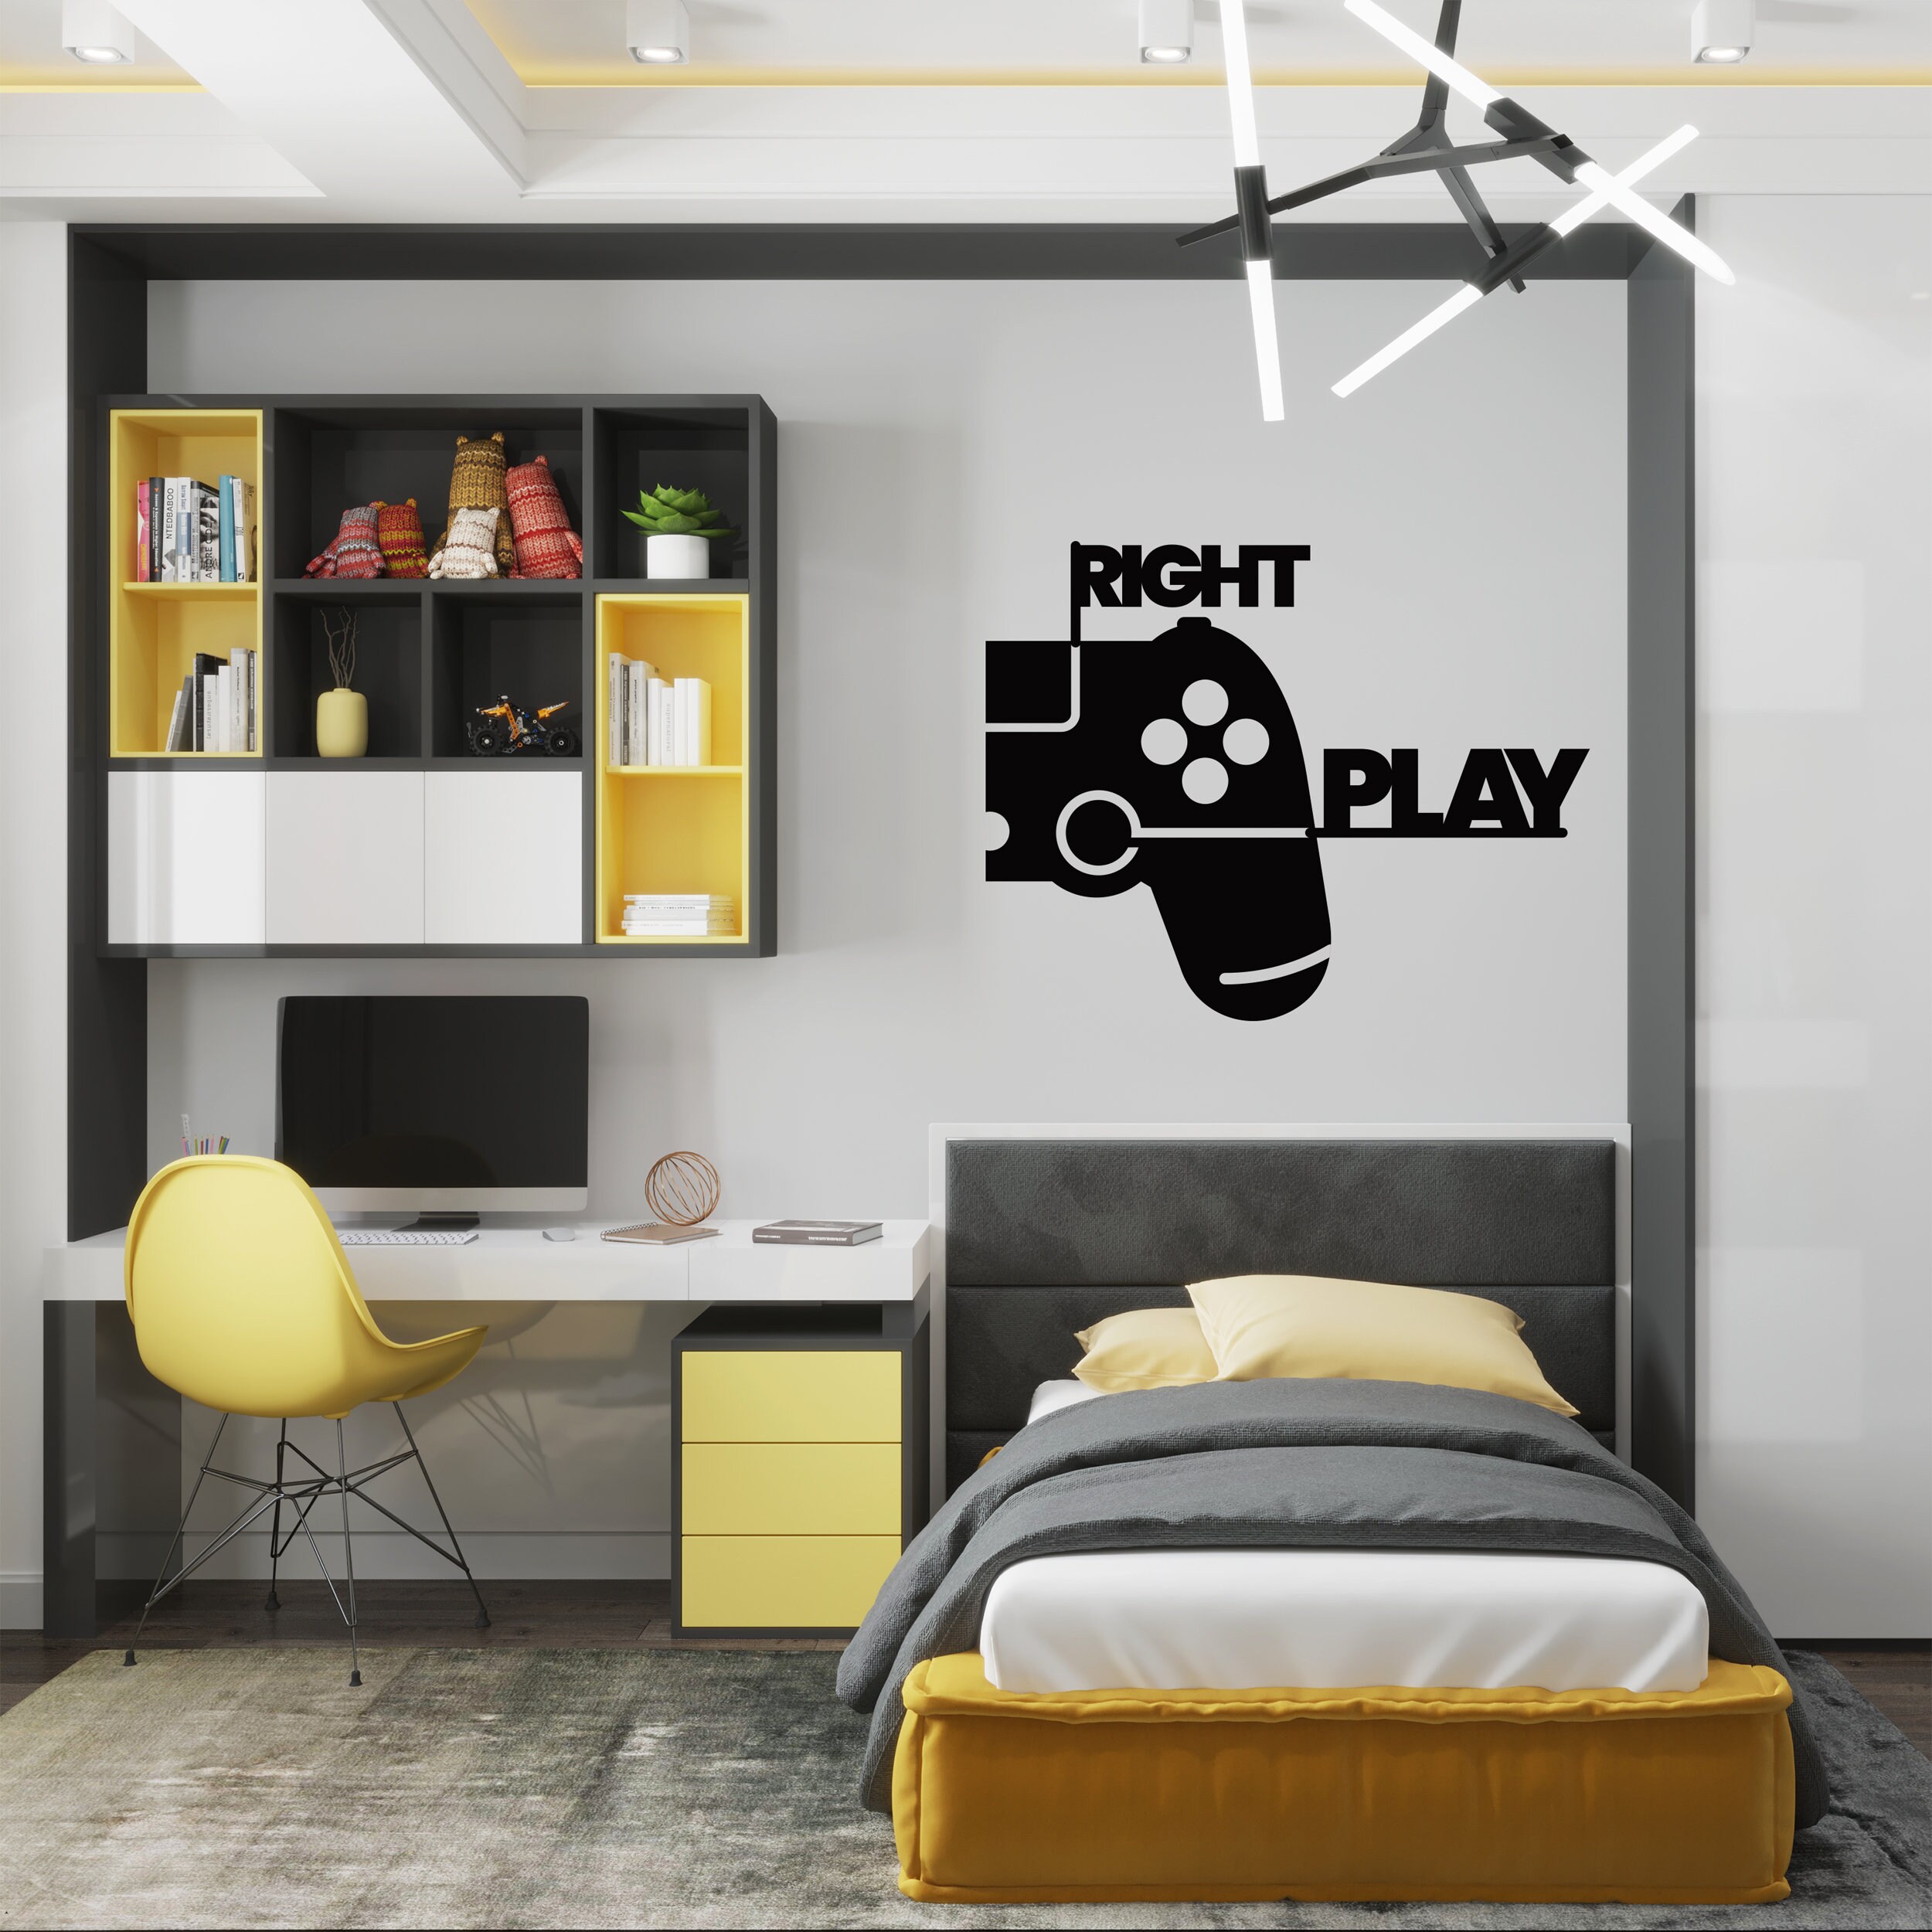 Wall Stickers Name Game, Play Wall Games, Vinyl Play